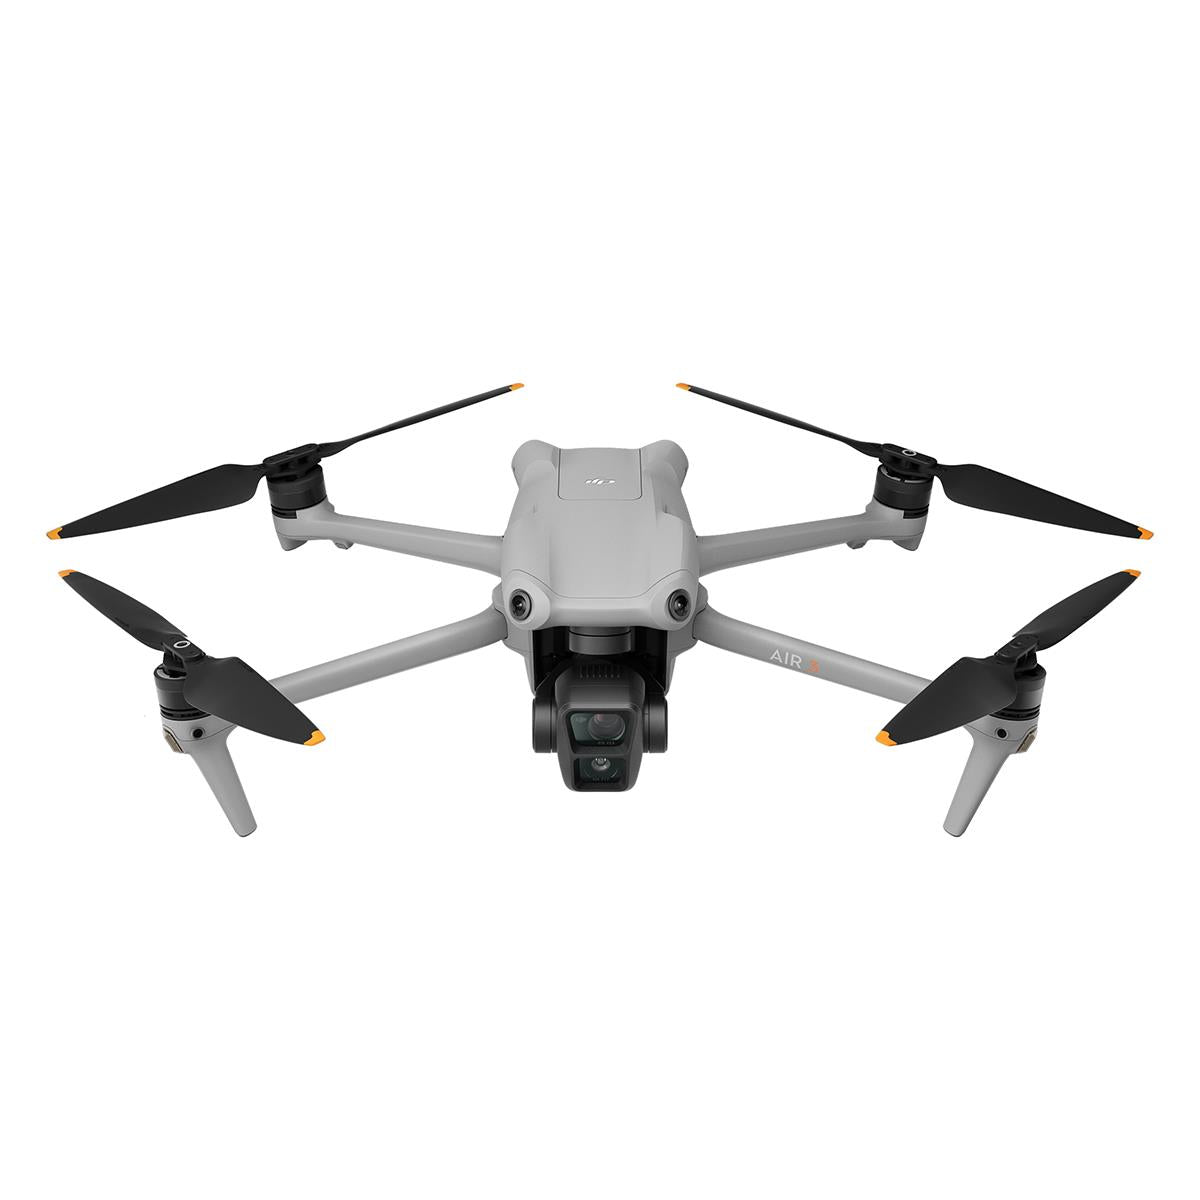 This 4K HD drone camera is only $70 for the holidays